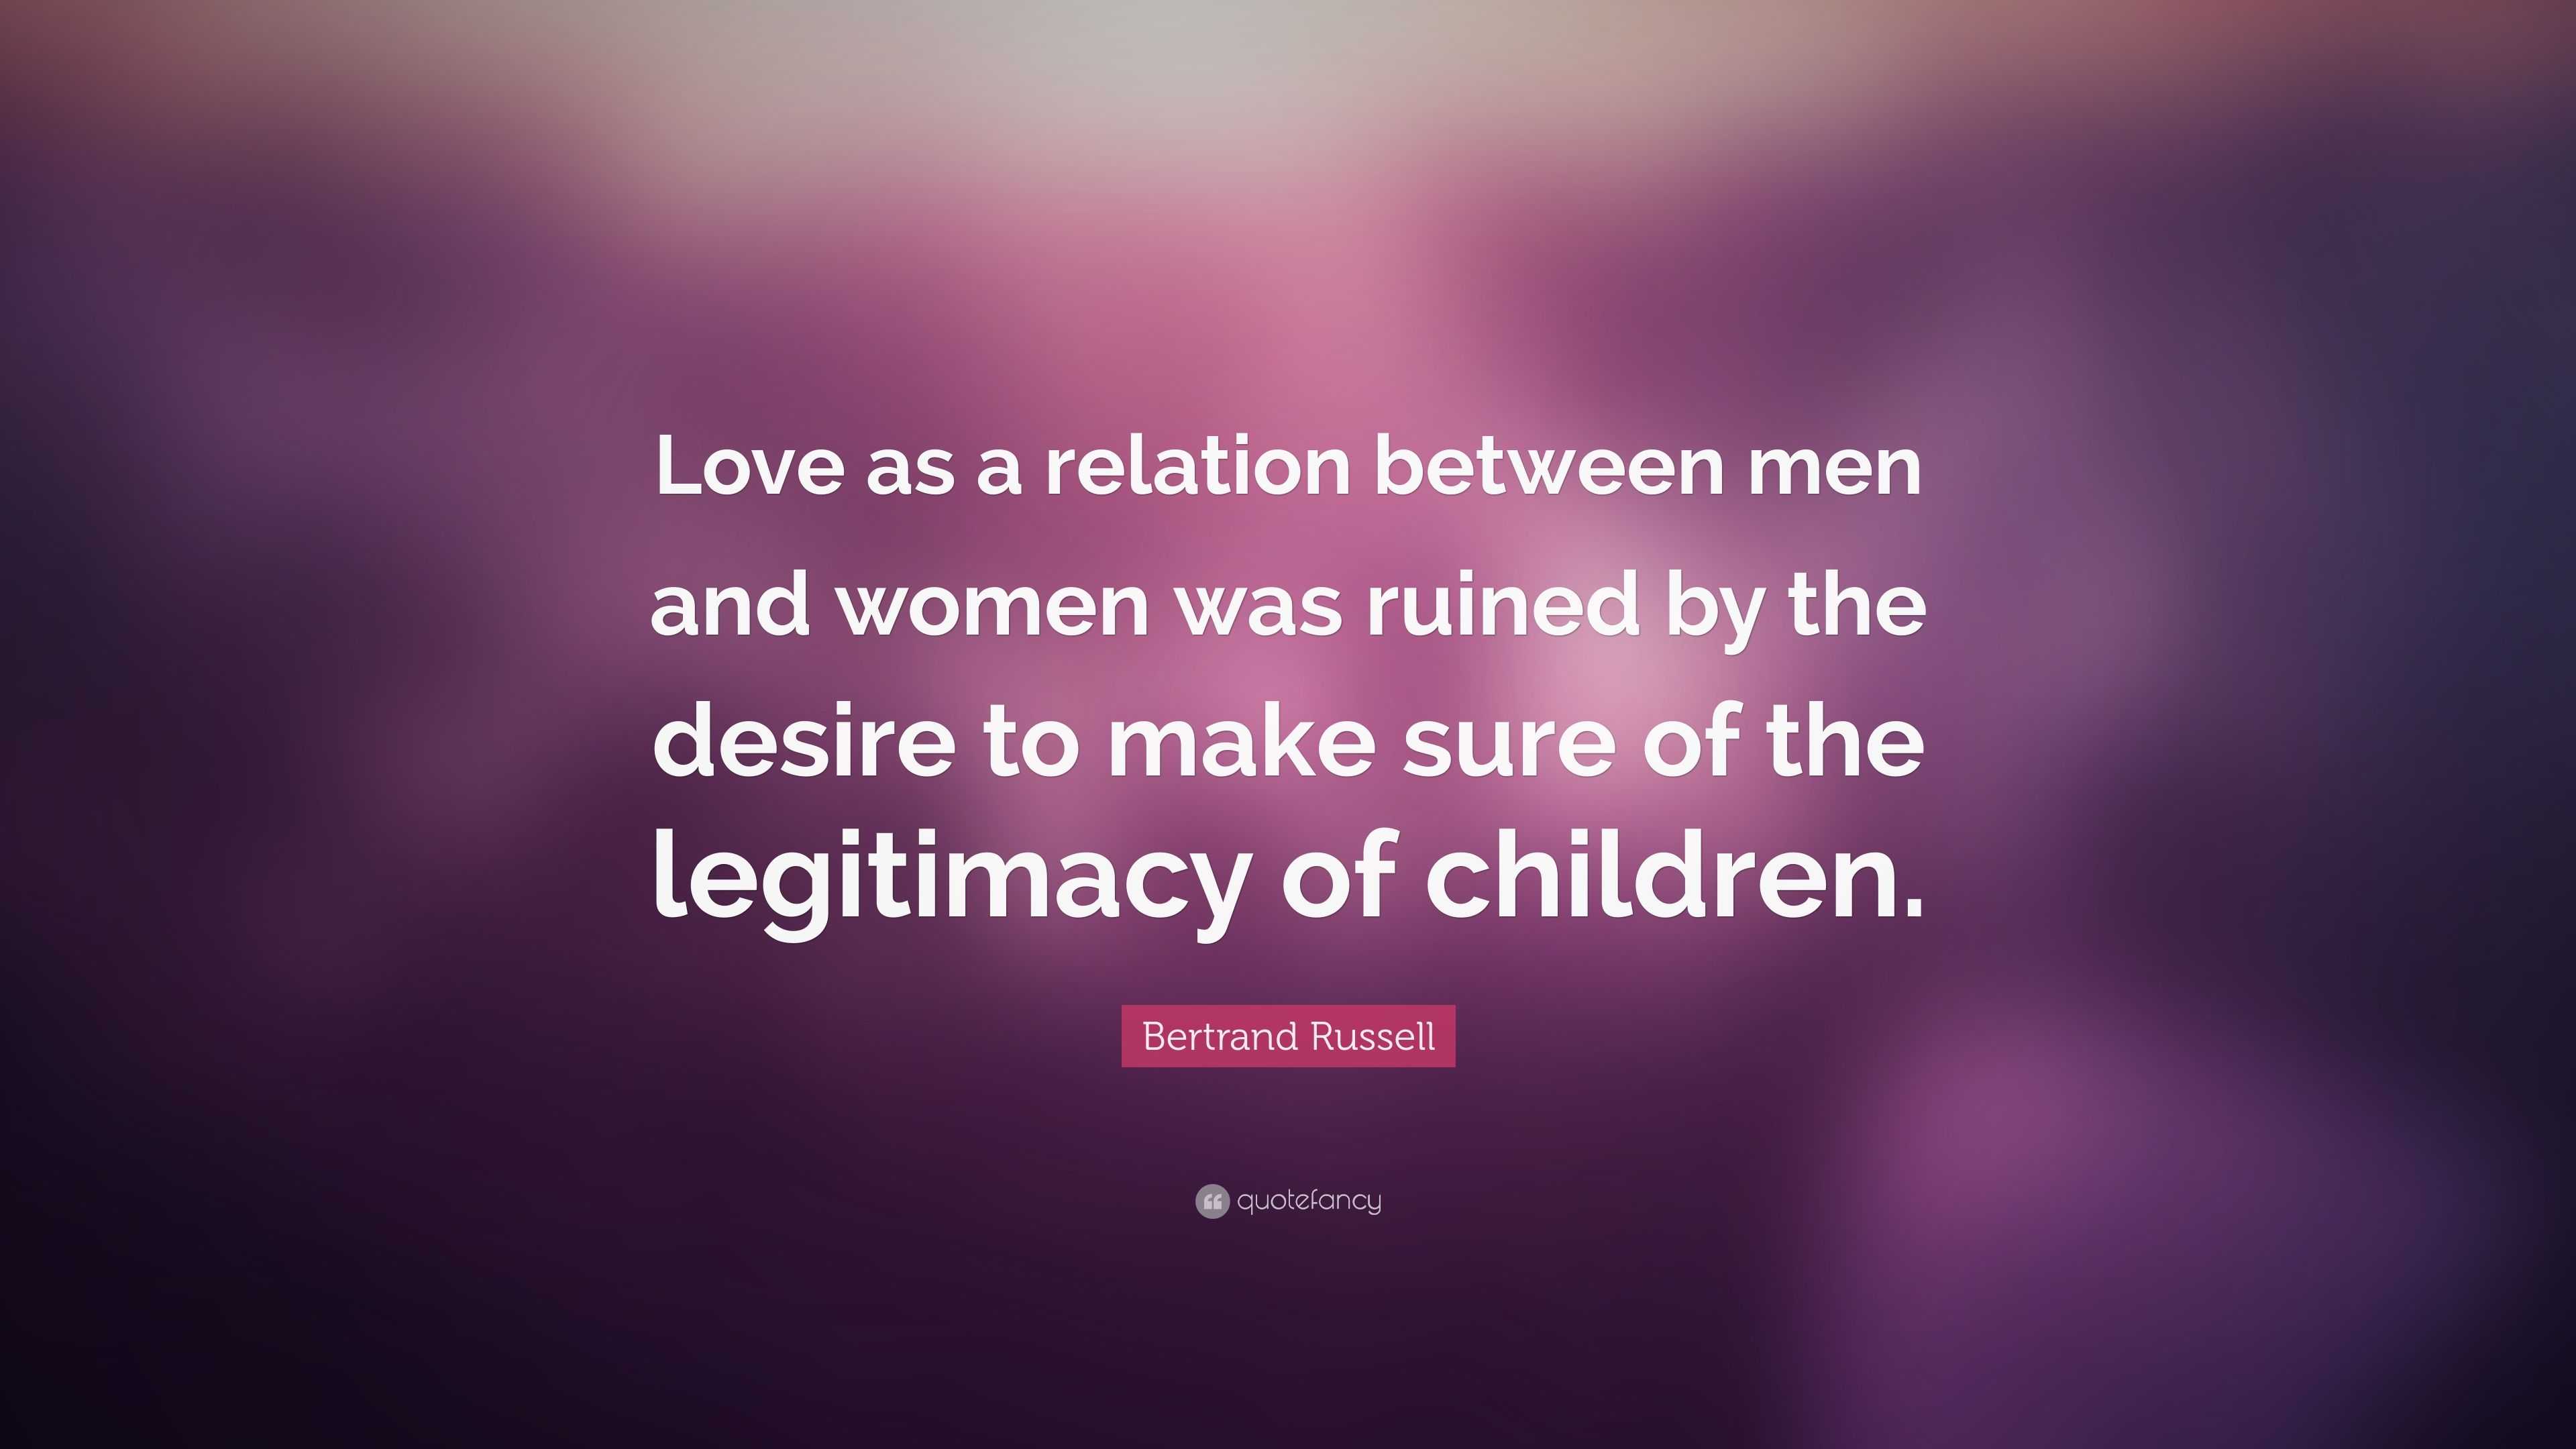 Bertrand Russell Quote “Love as a relation between men and women was ruined by